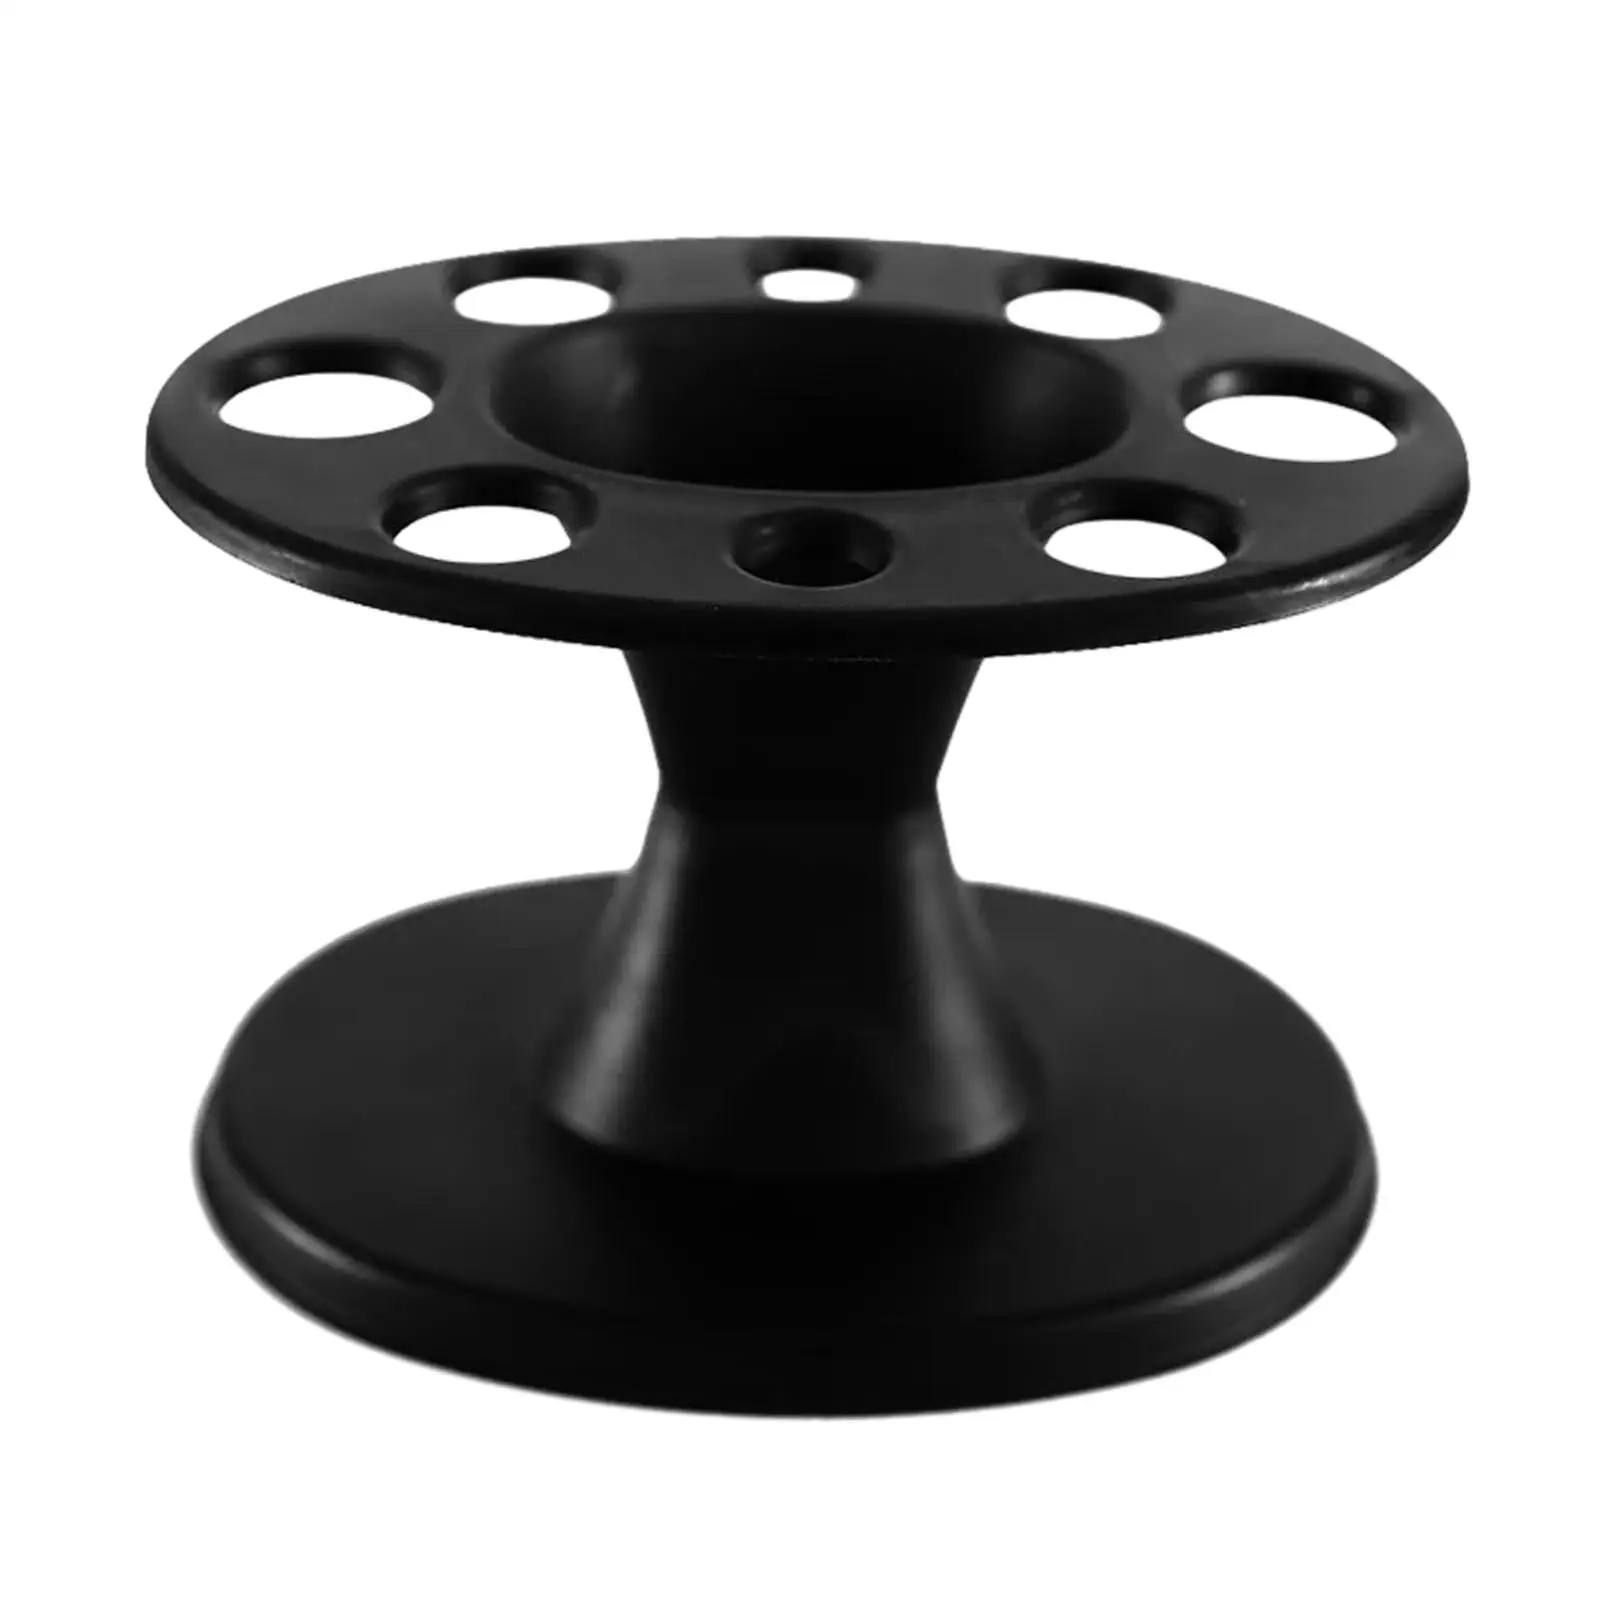 Round Comb Storage Stand Black Hair Brush Holder for Home Use Barber Salon